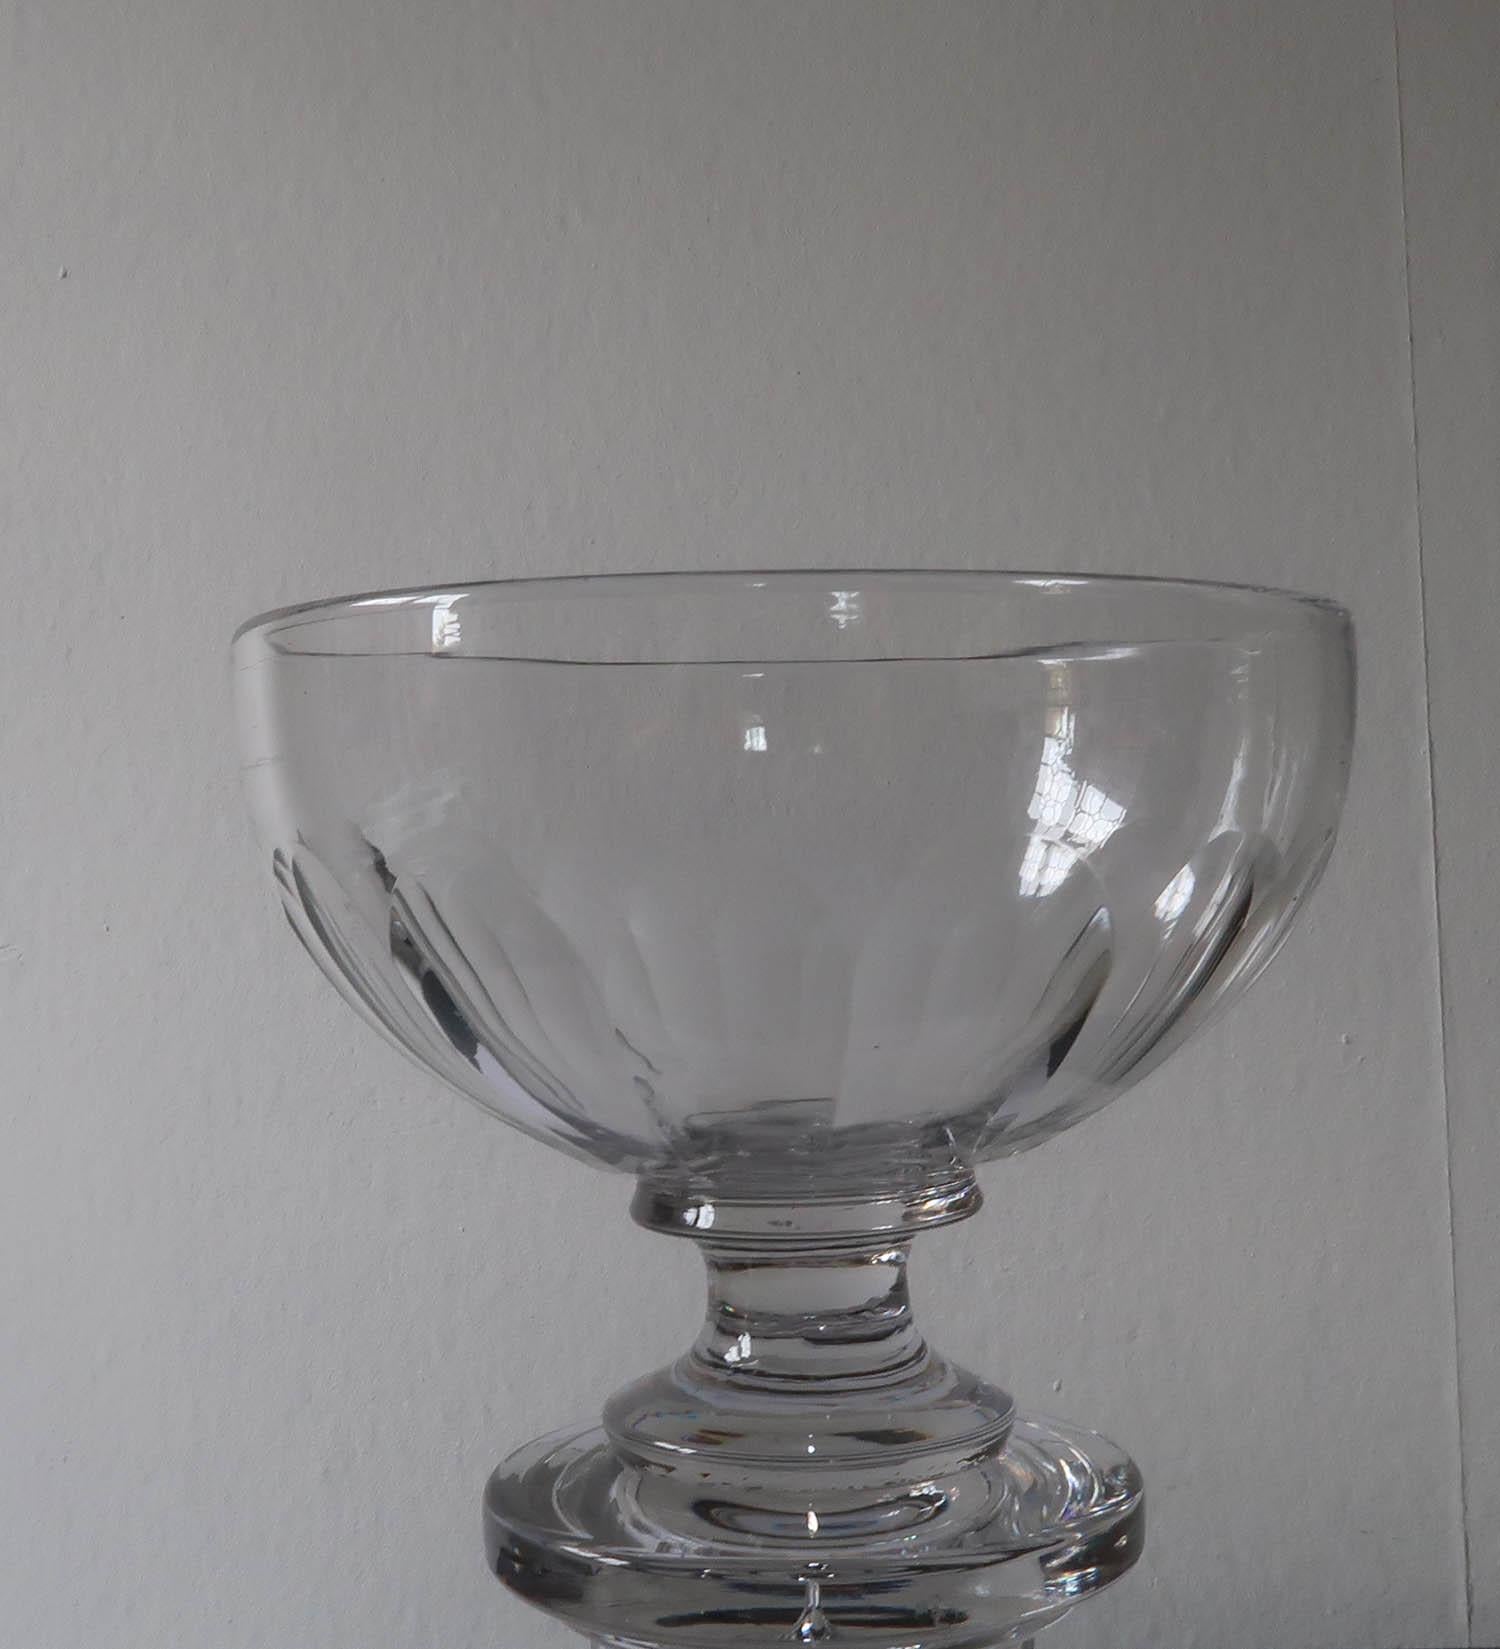  Large Antique Georgian Style Glass Pedestal Bowl, English, 19th Century For Sale 4